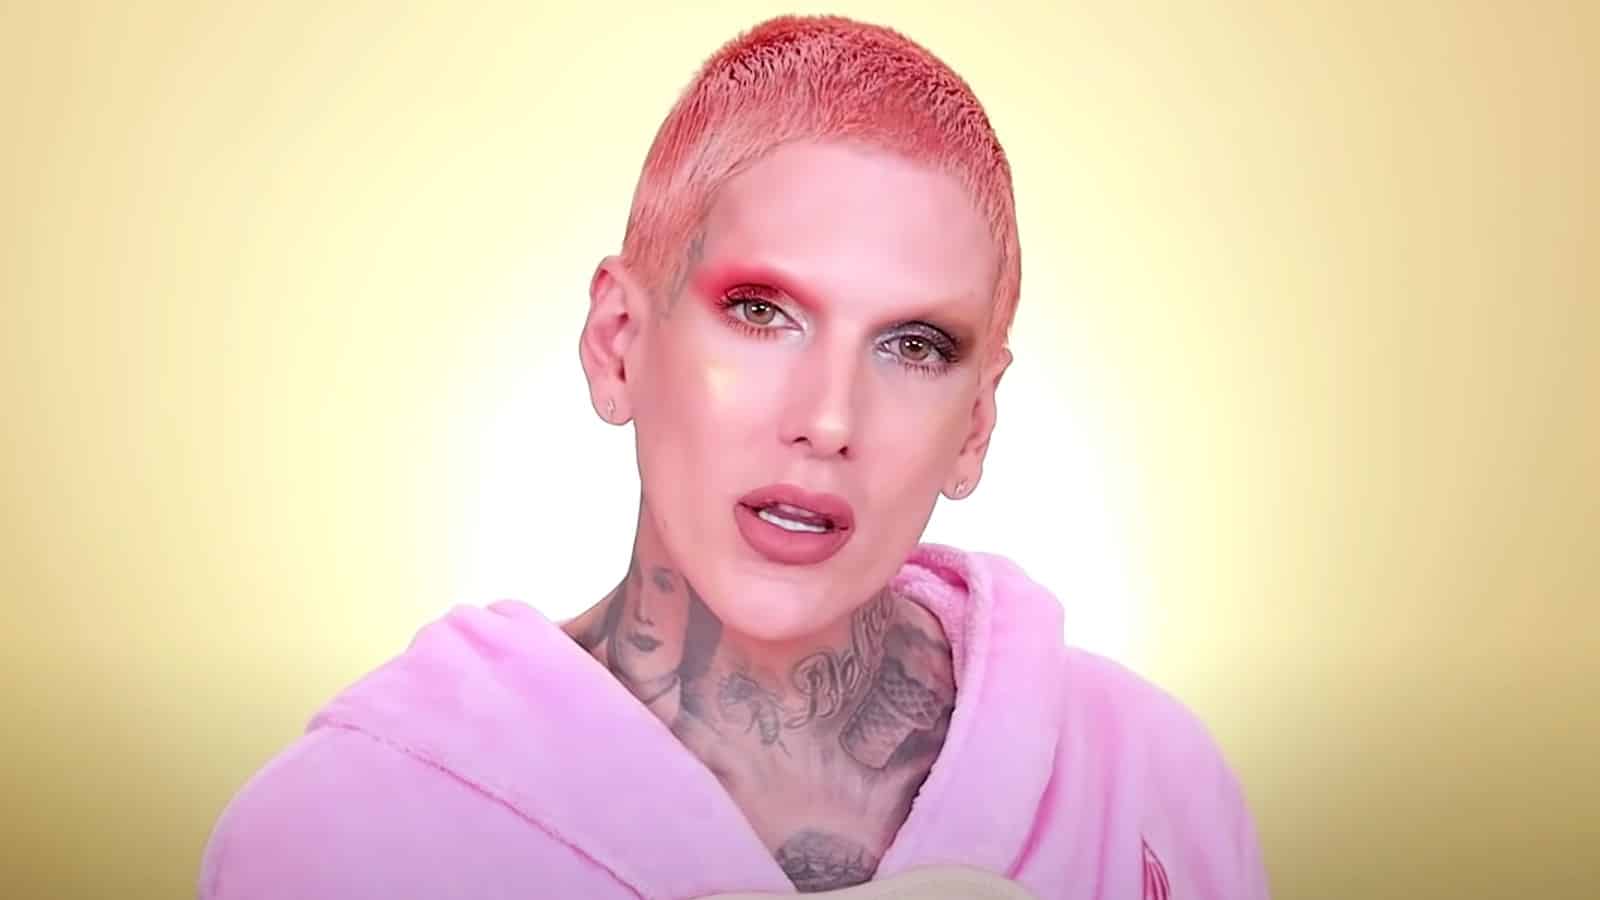 Jeffree Star Selling California Mansion amid Permanent Move to Wyoming